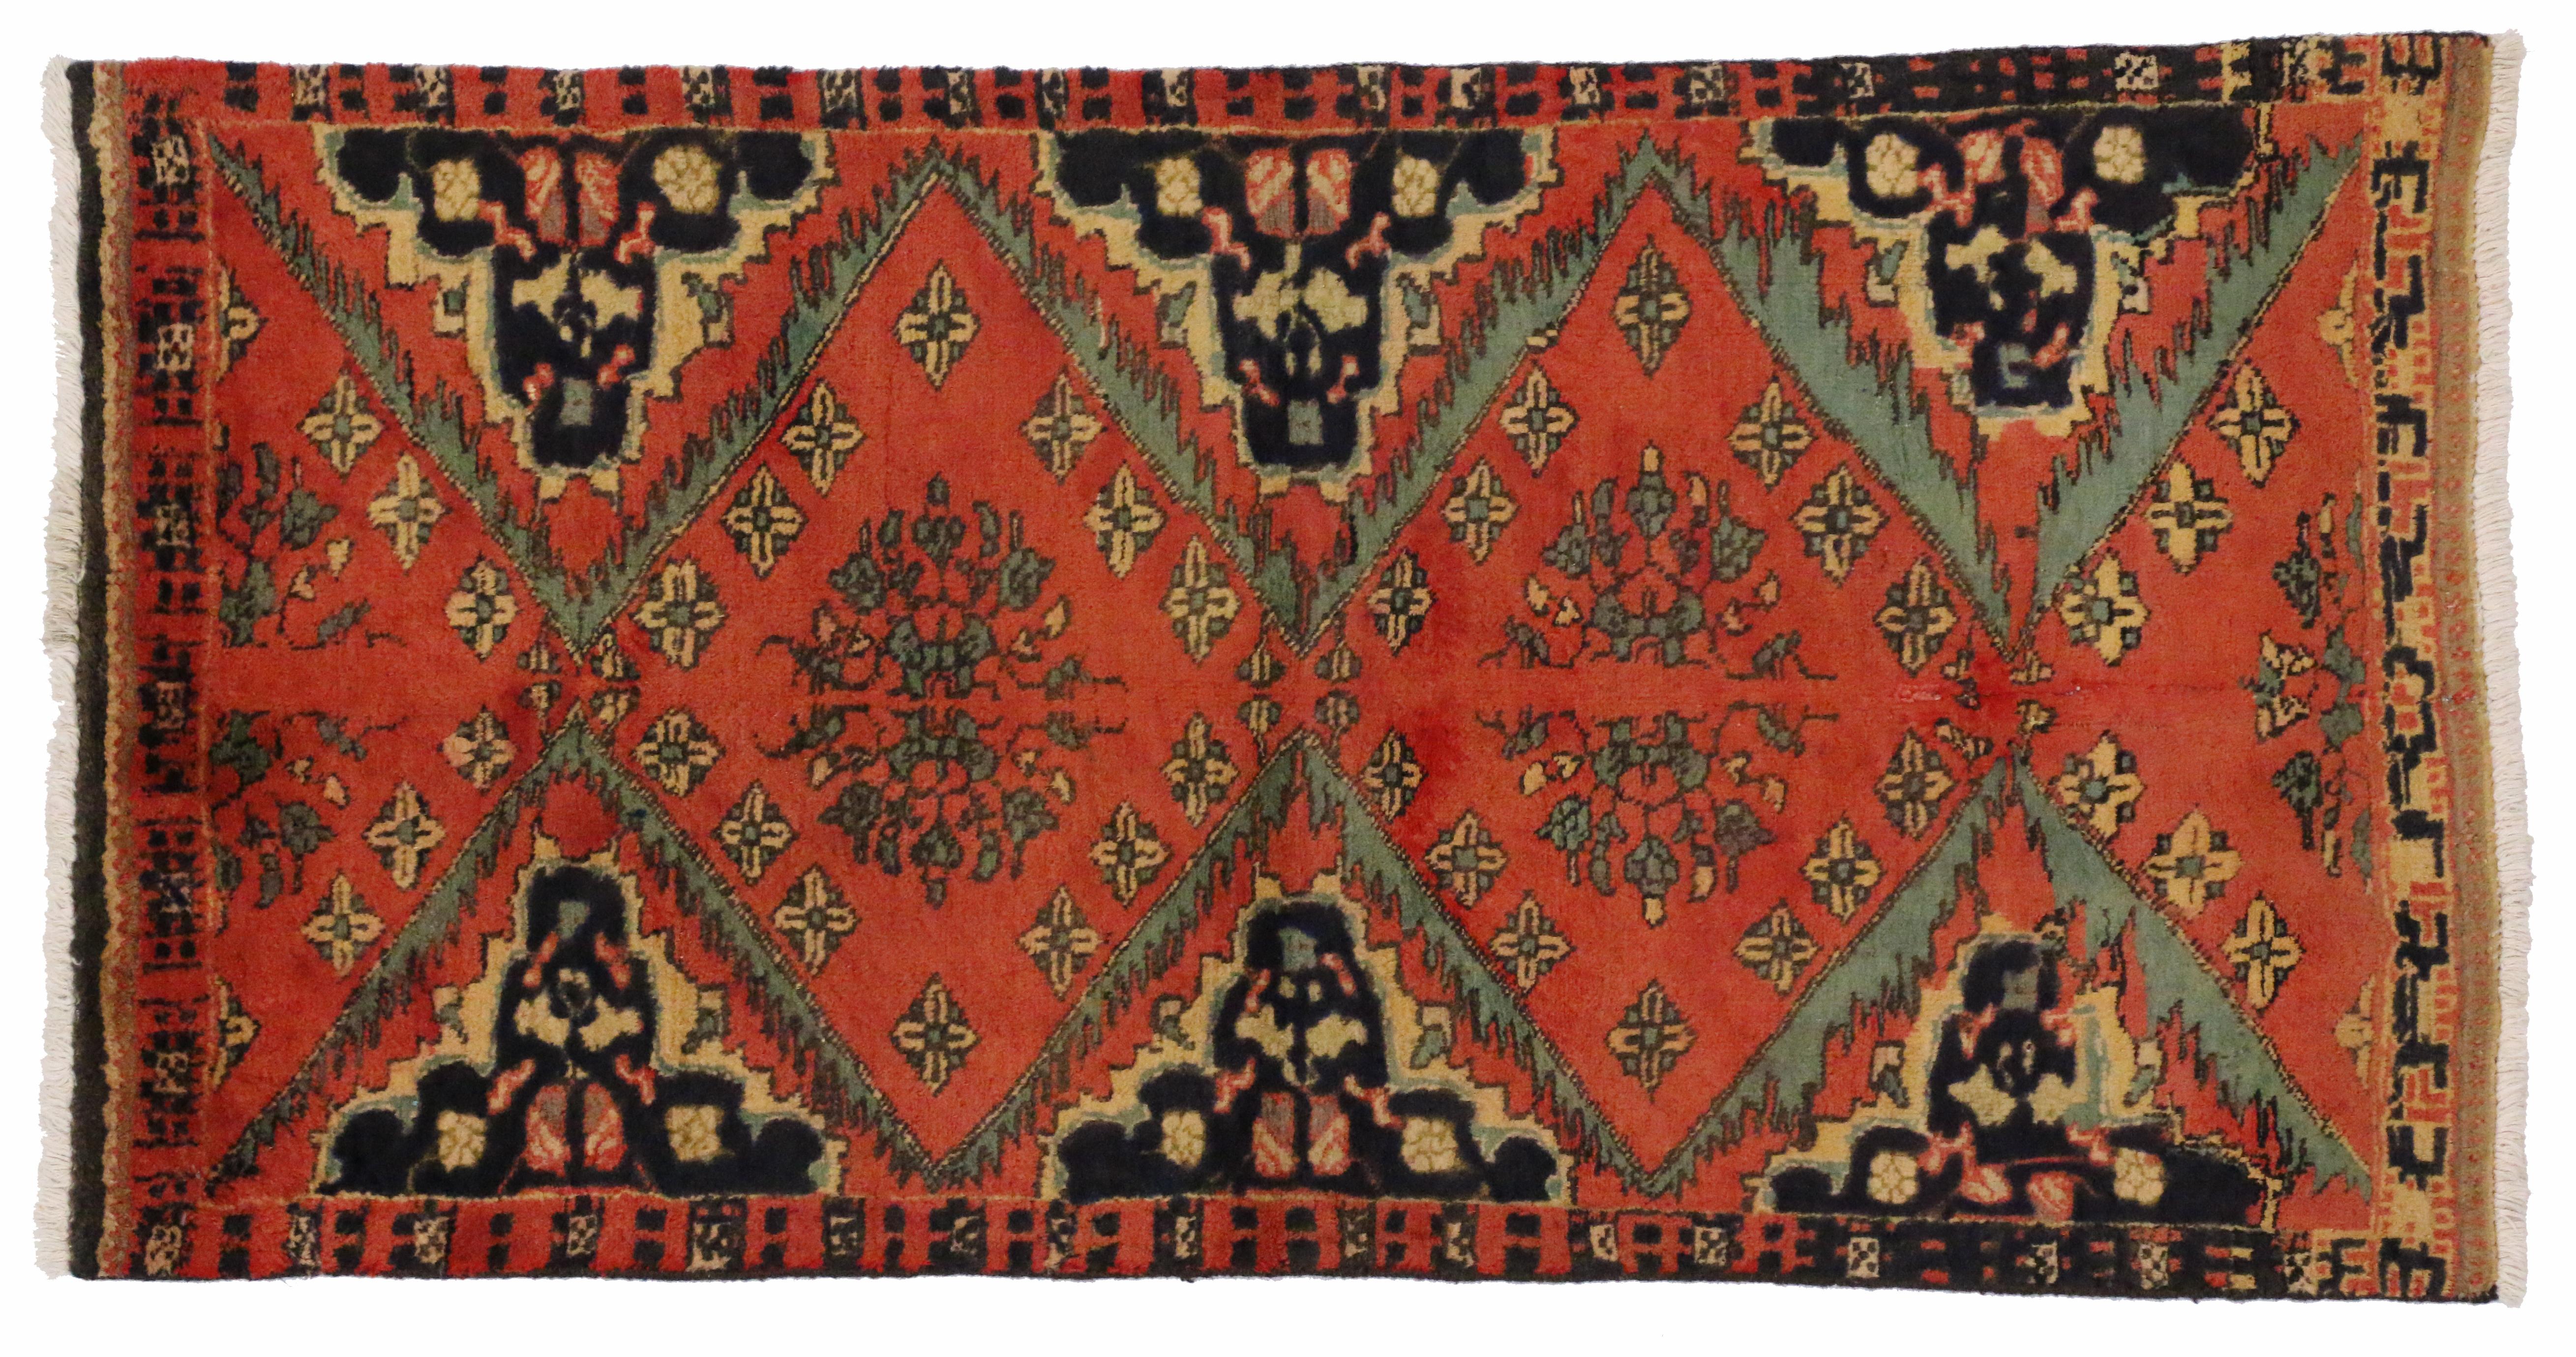 76078, vintage Persian Hamadan rug, entry or foyer rug. Bright and welcoming, this hand-knotted wool vintage Persian Hamadan Rug is like a gracious invitation into nearly any interior where it is displayed. Bright persimmon creates the primary